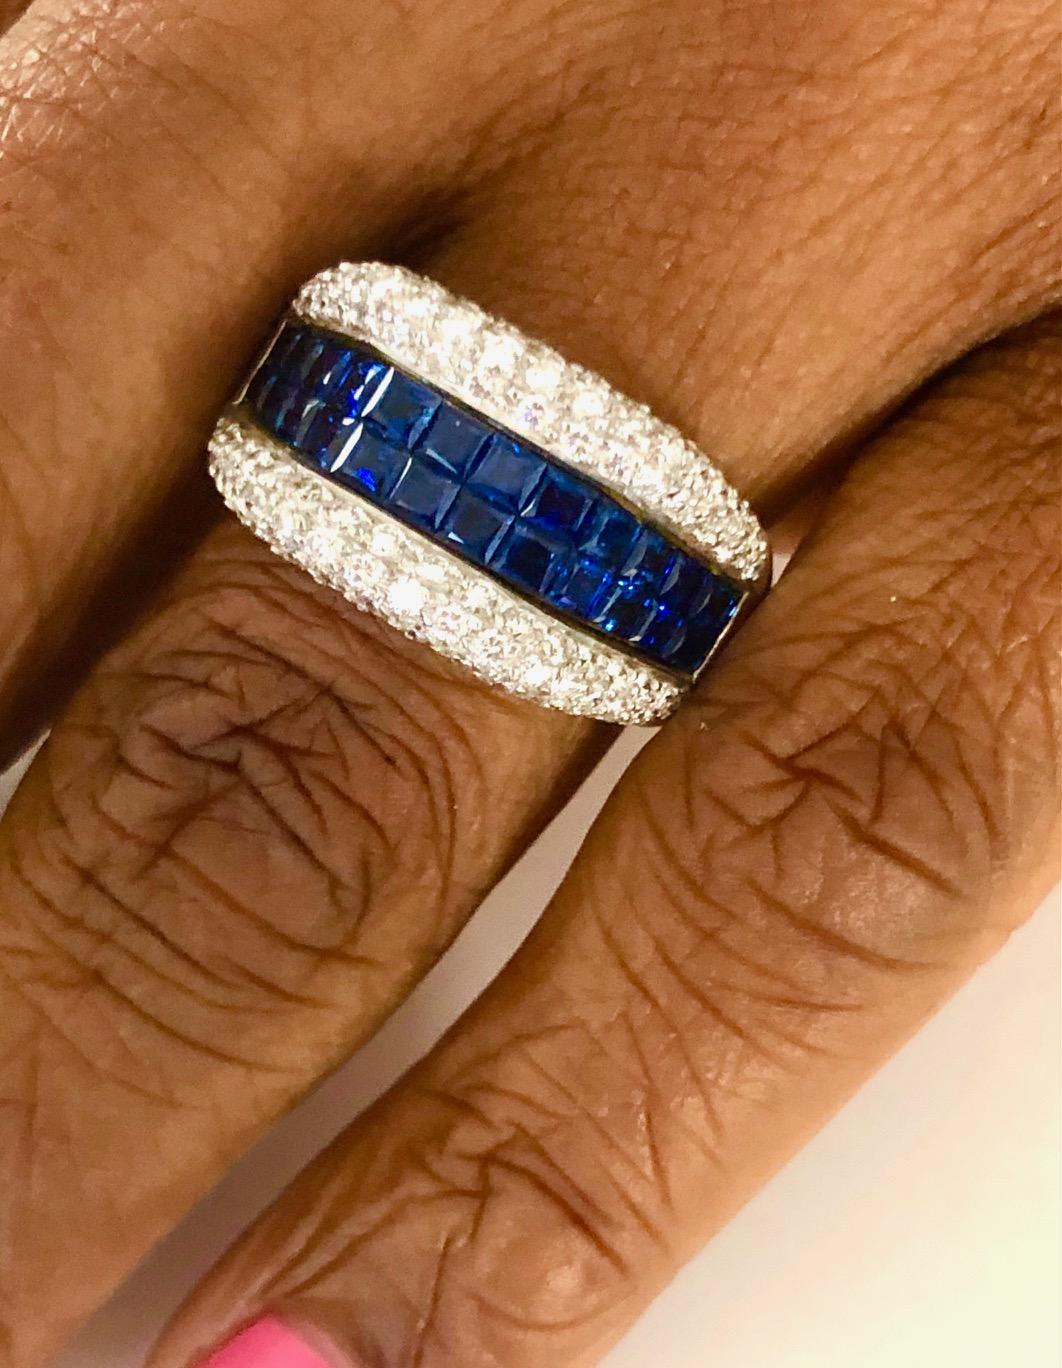 Beautiful and well made in 18K White Gold Ring set with 118 Diamonds 1.48 carats and 24 Invisible set Square Sapphires 3.26 carats.

We design and manufacture our jewelry in our workshop, located in New York City's diamond district.